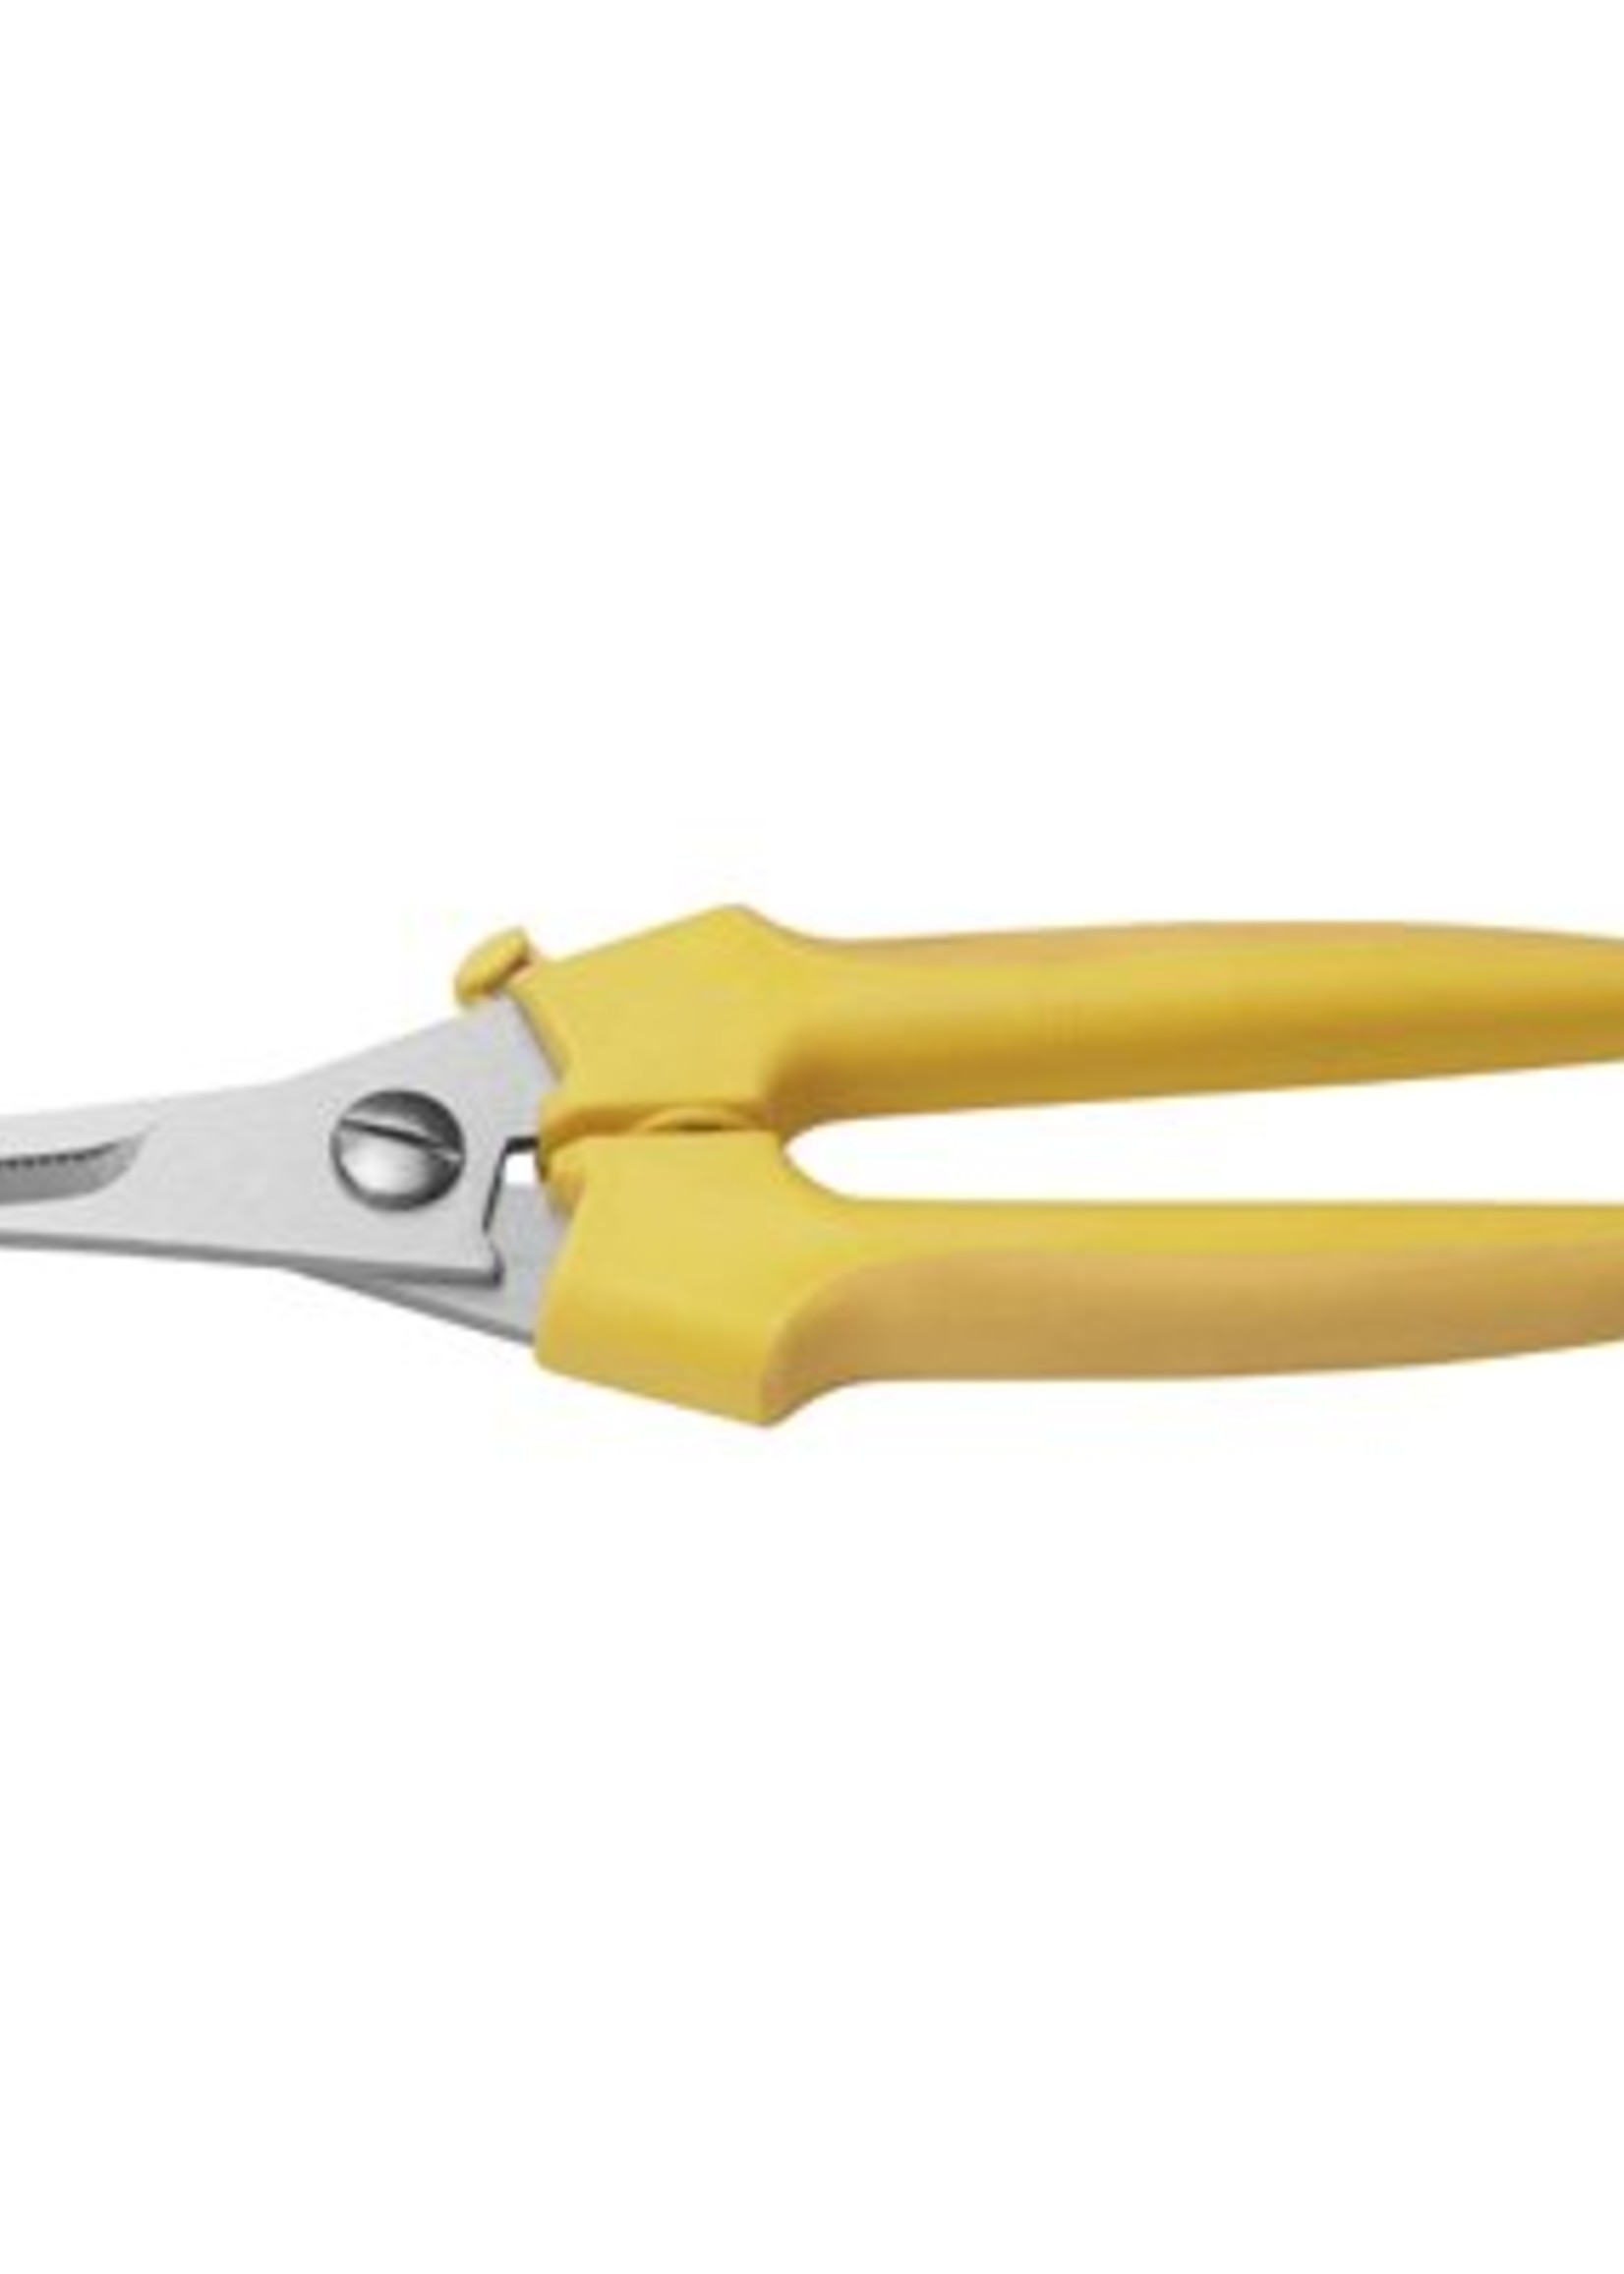 OASIS® Bunch Cutters